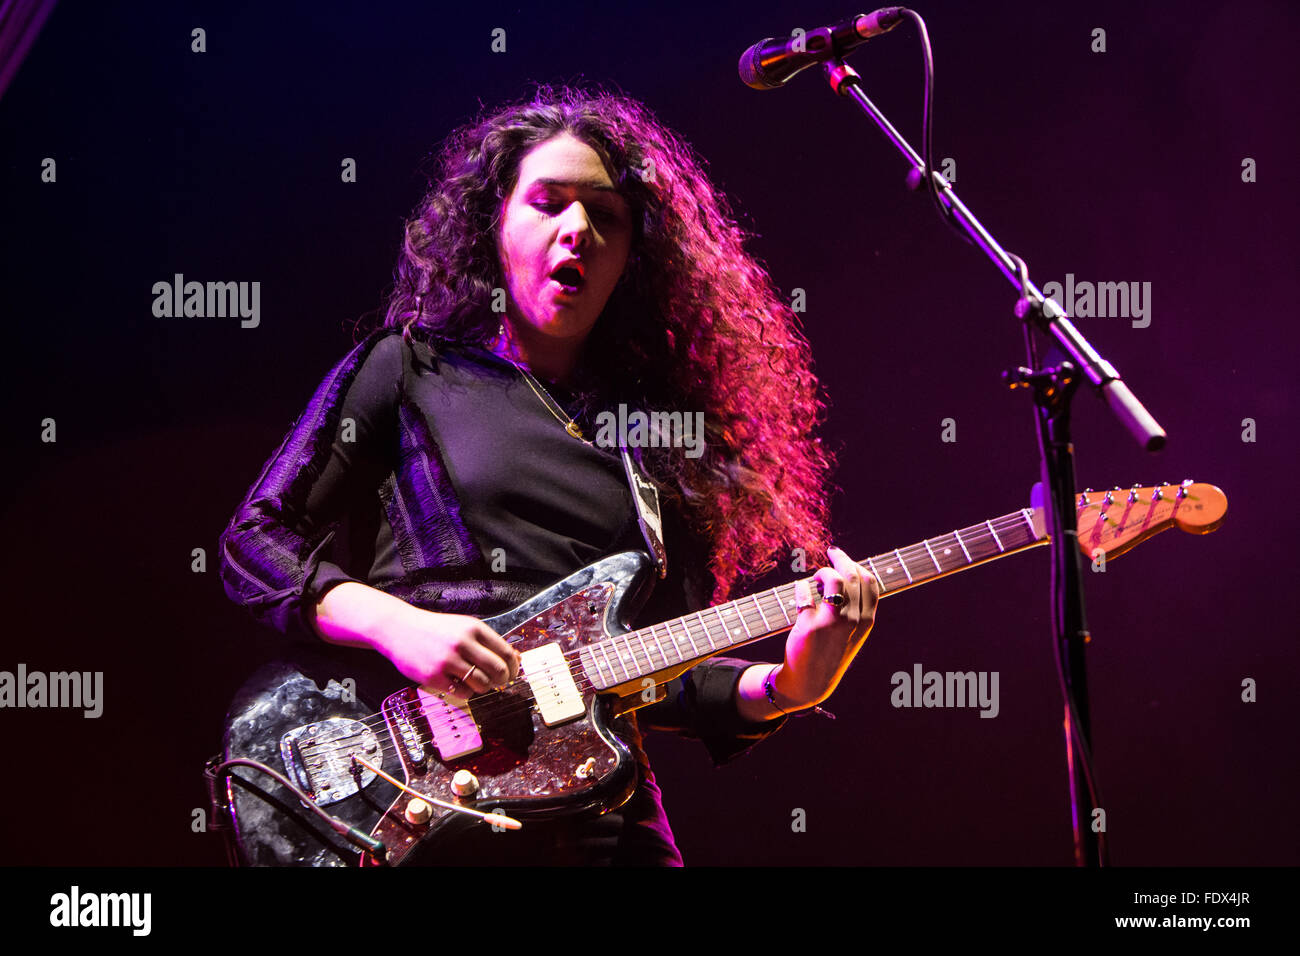 Milan Italy. 01th February 2016. The German pop singer Sara Hartman performs live on stage at Mediolanum Forum opening the show of Ellie Goulding © Rodolfo Sassano/Alamy Live News Stock Photo